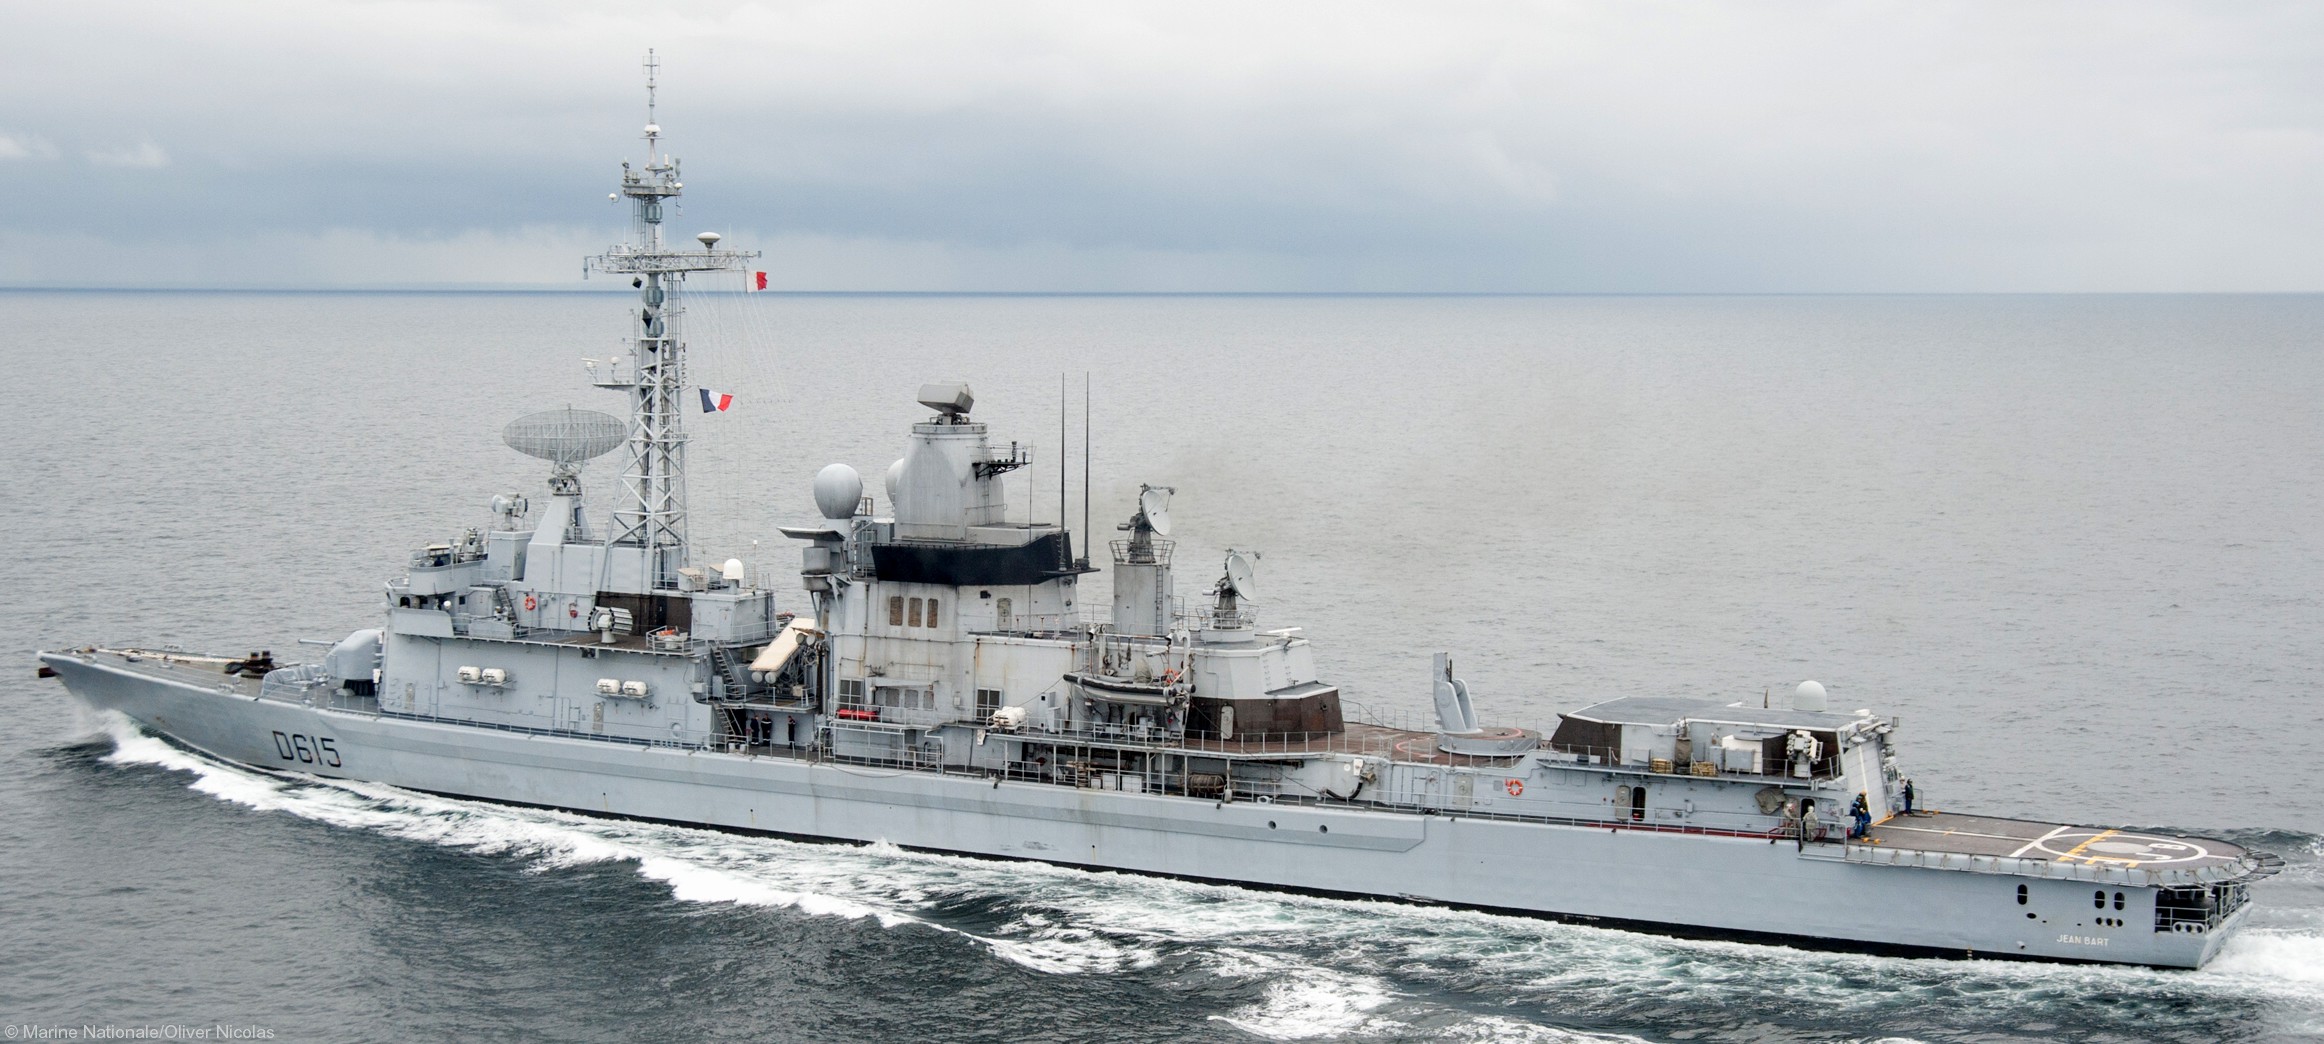 cassard class type f70aa guided missile air defense frigate french navy sm-1mr standard d-615 jean bart